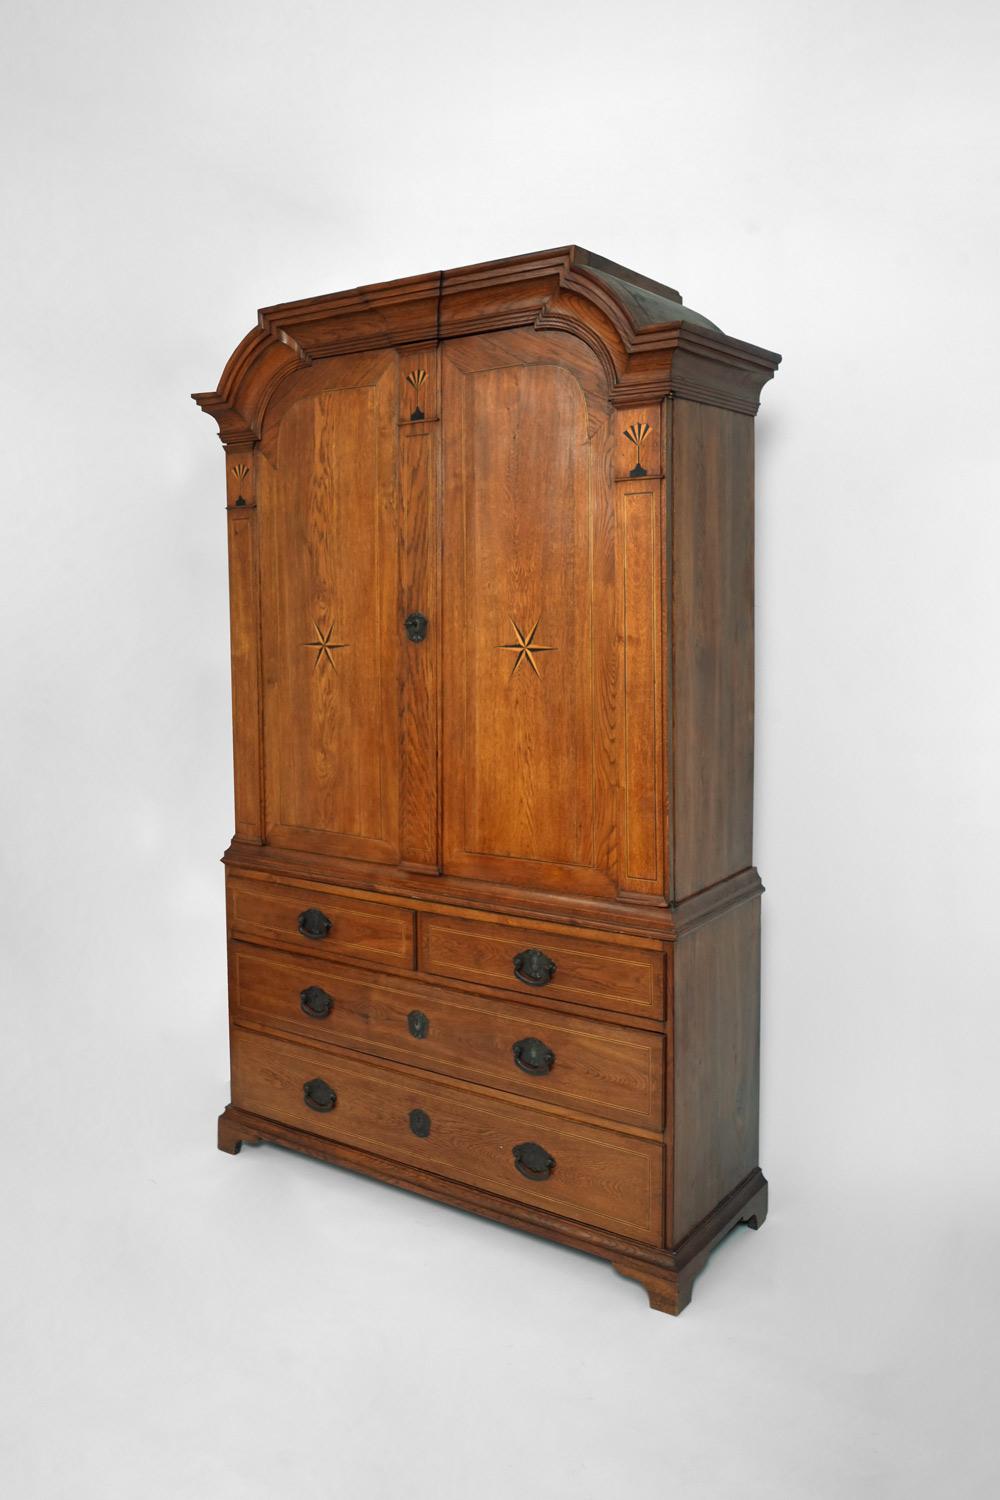 Natural wood cabinet opening with two doors in the upper part and four drawers in the lower part, decorated with light and dark wood marquetry of wind roses and framed with nets. Arched molded cornice. Handles and keyholes in hammered bronze. Label